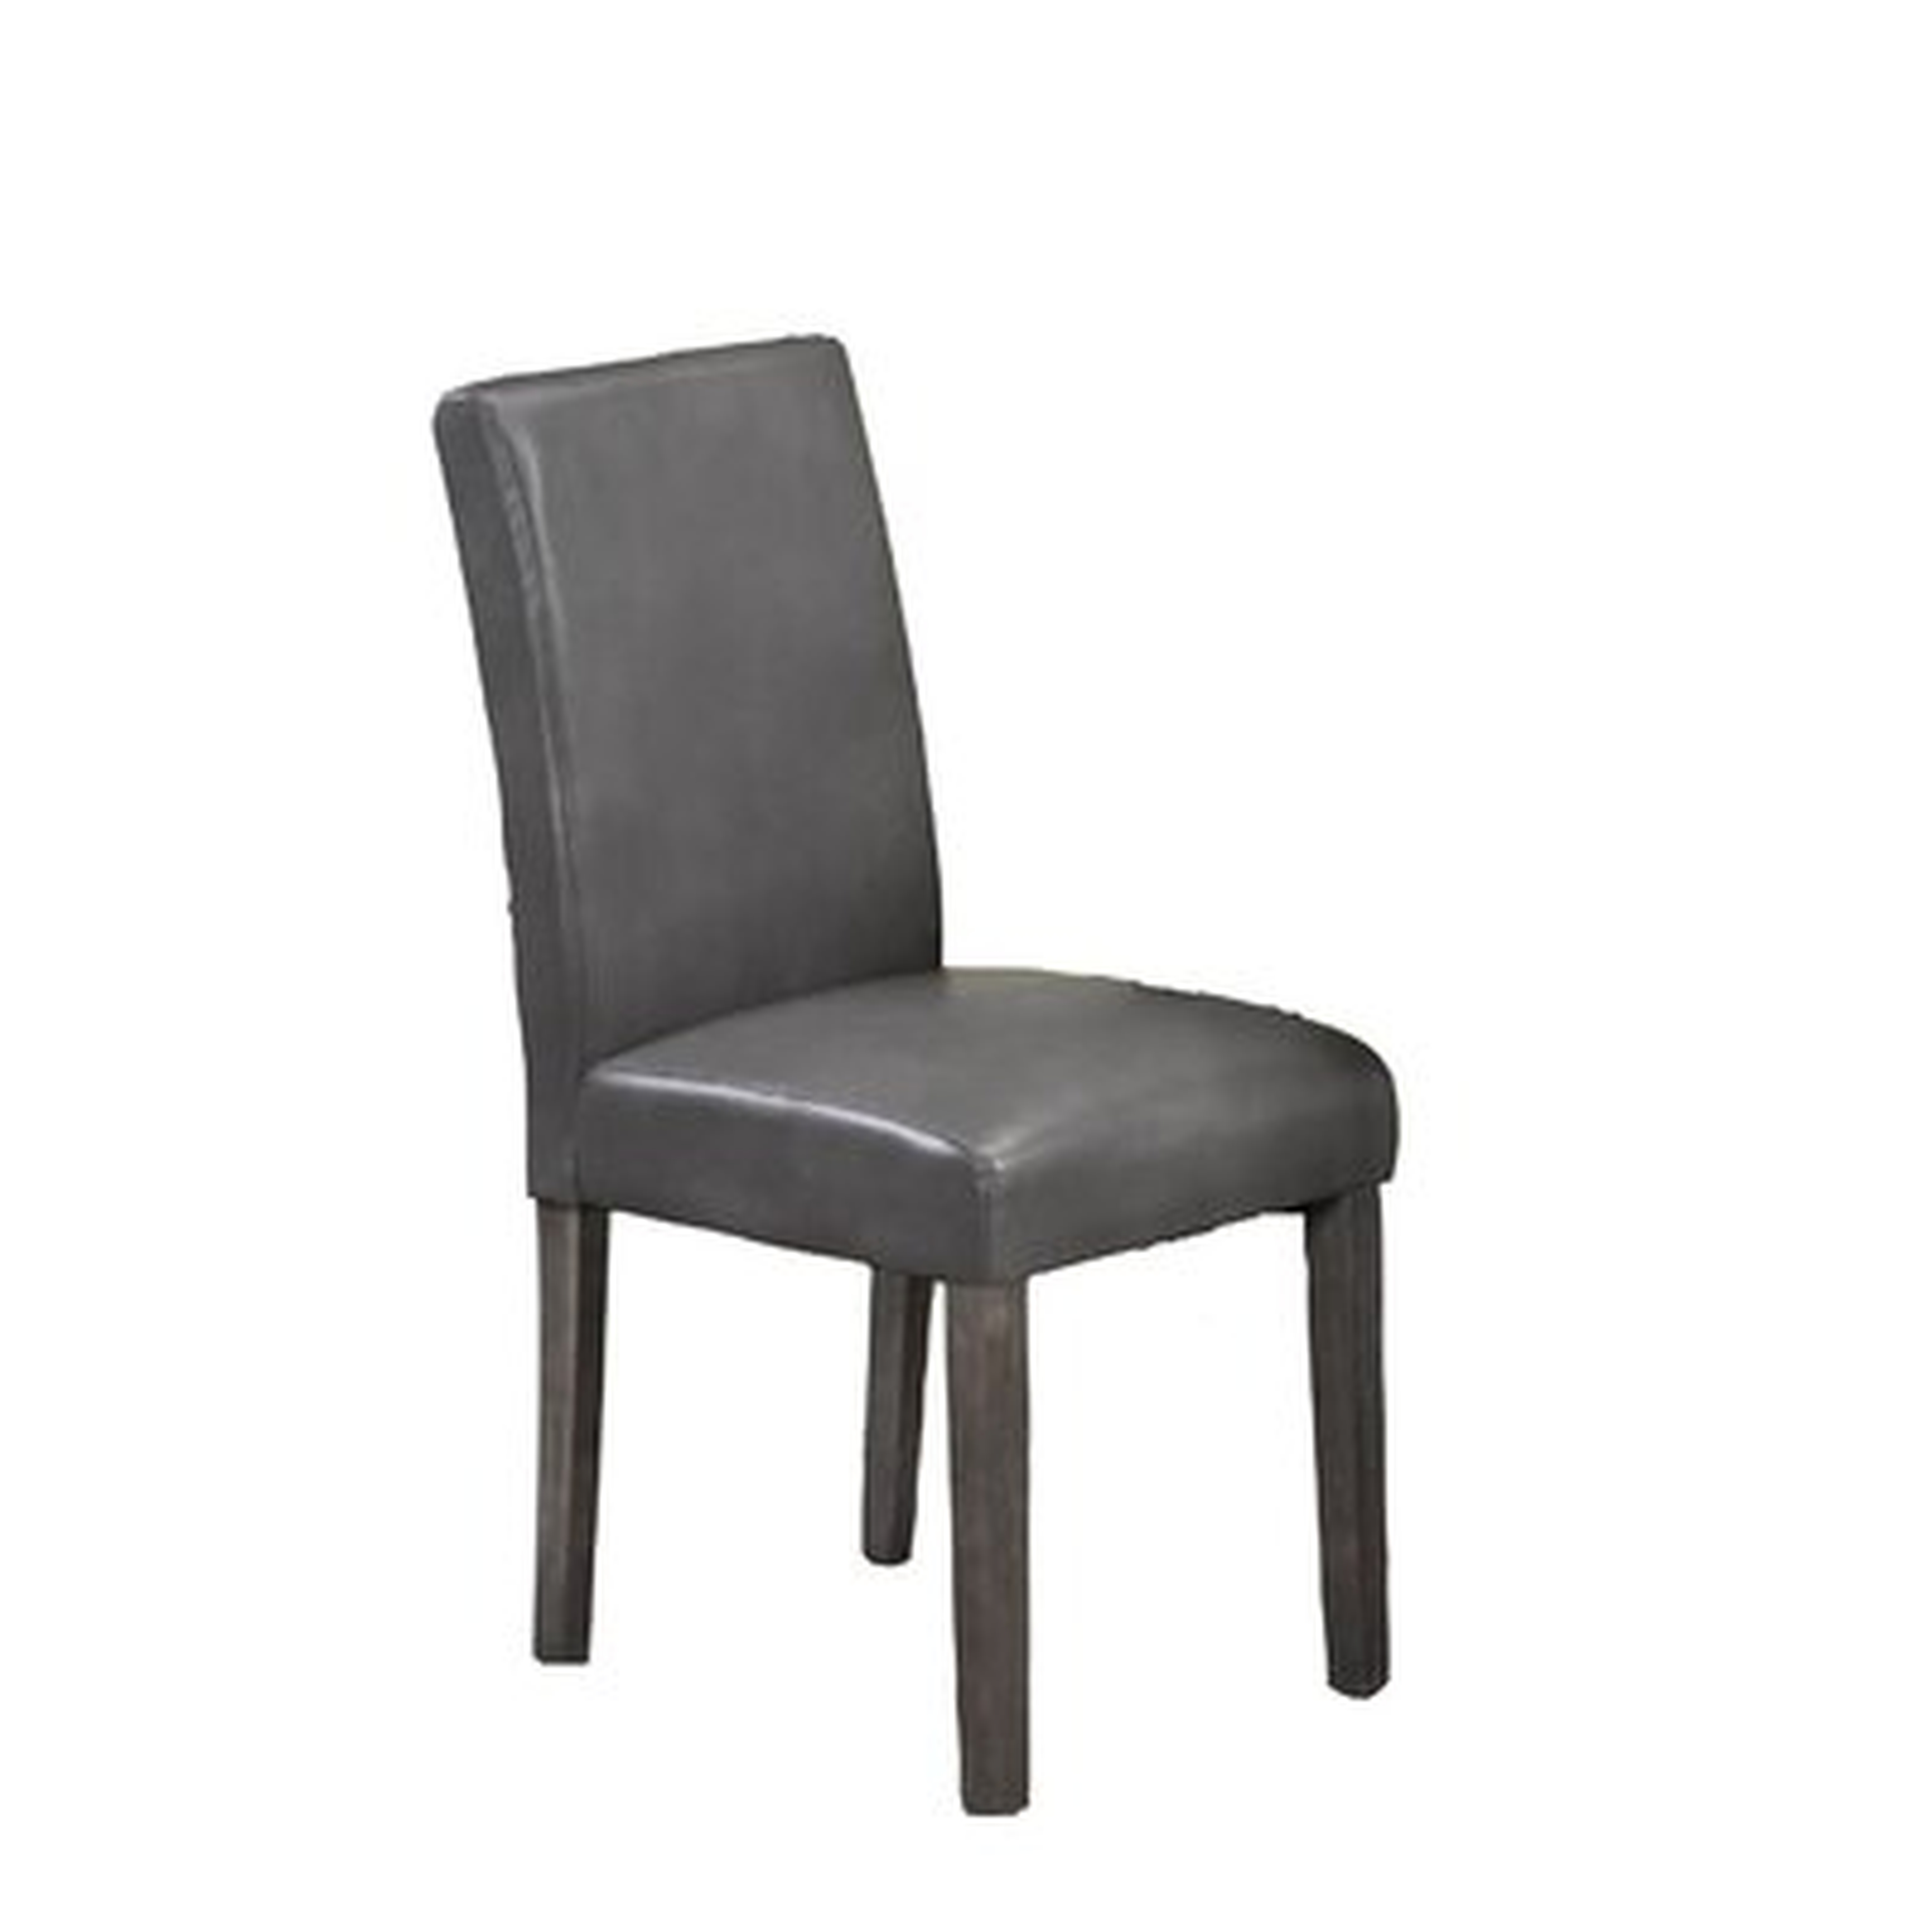 Hopeland Leather Upholstered Parsons Chair in Gray - Wayfair